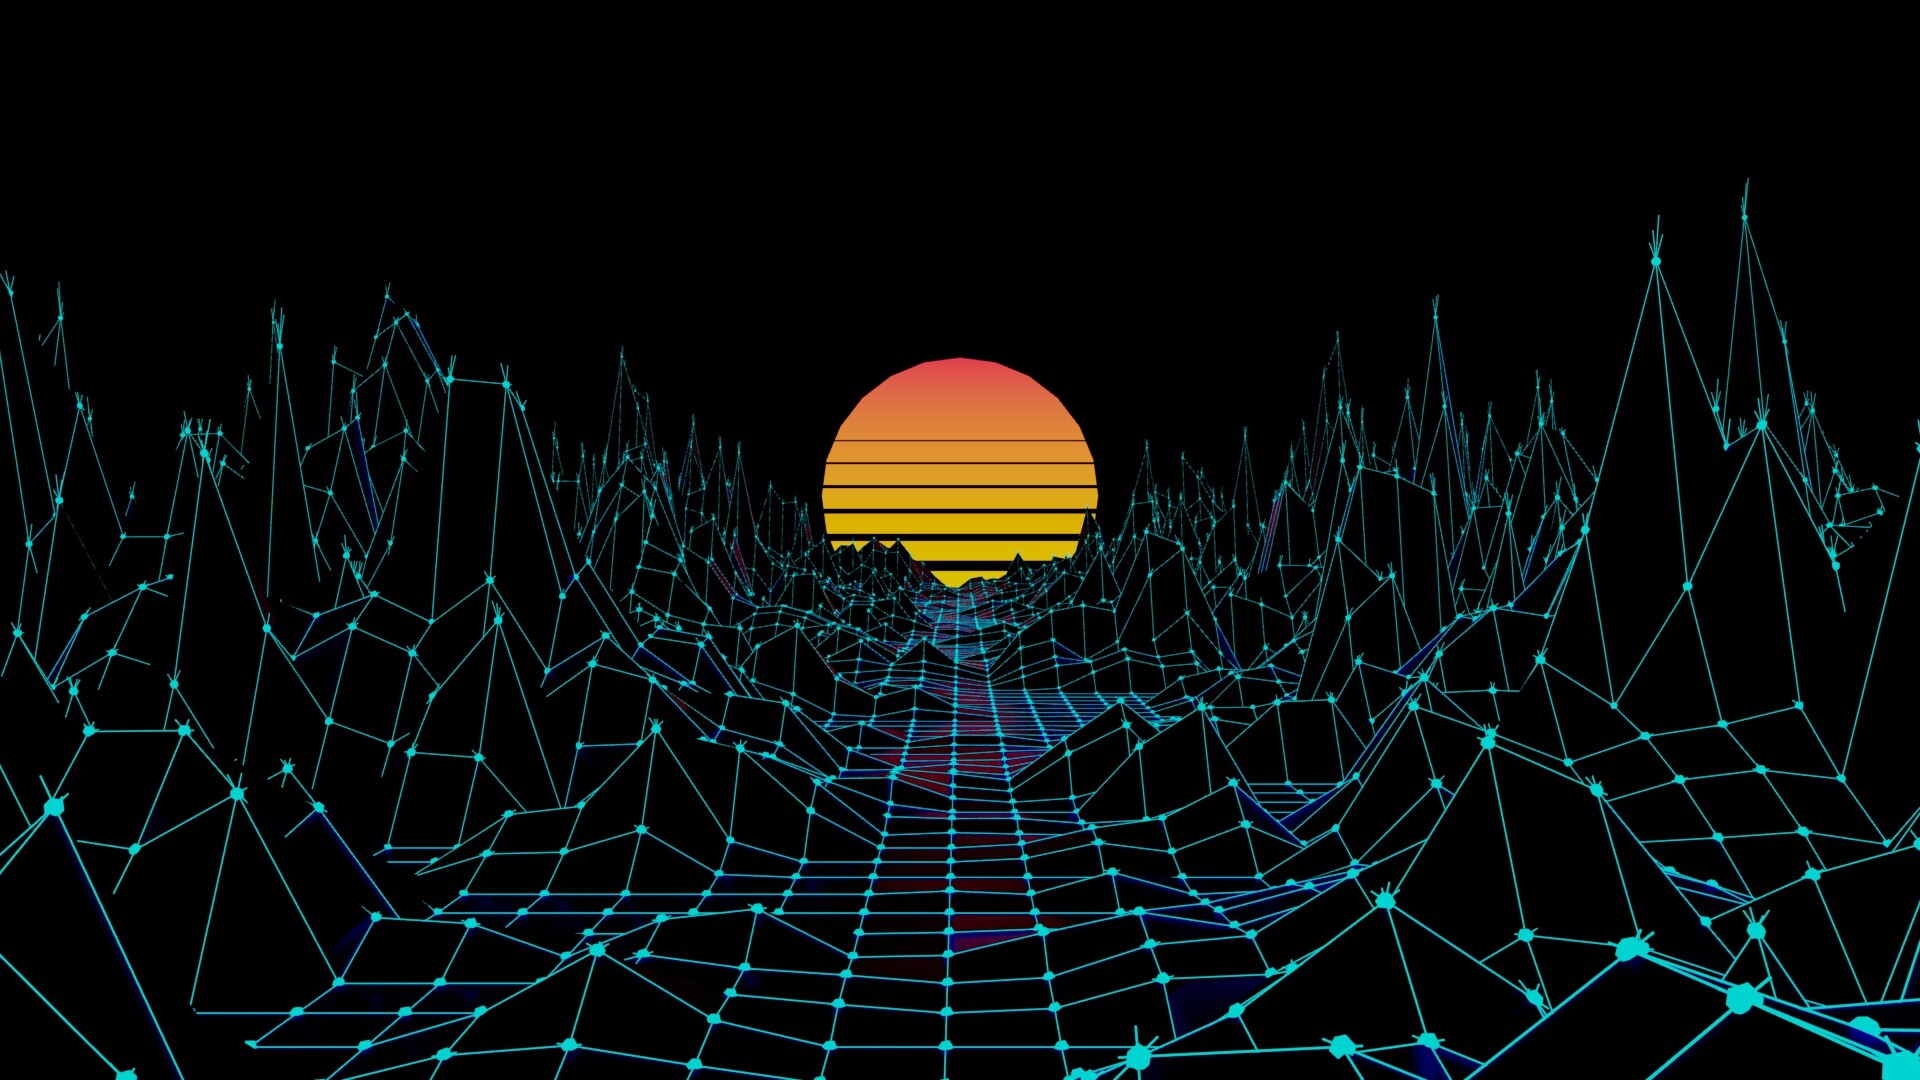 Outrun Pixel Sunset Wallpapers